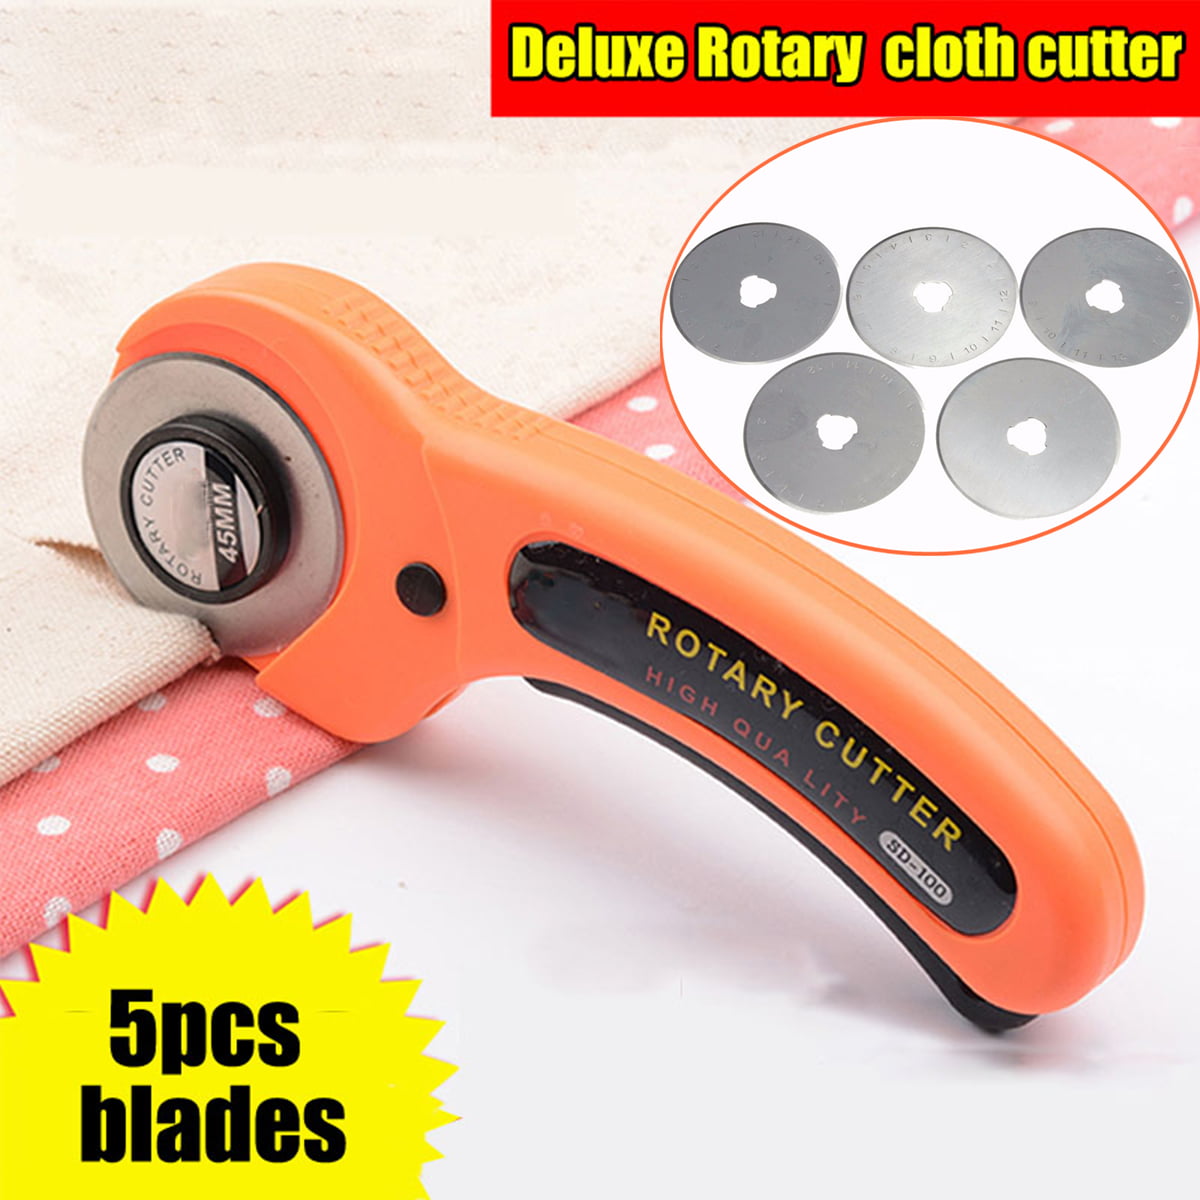 10 Blades 45 mm Rotary Blade Precision Quilting Tools